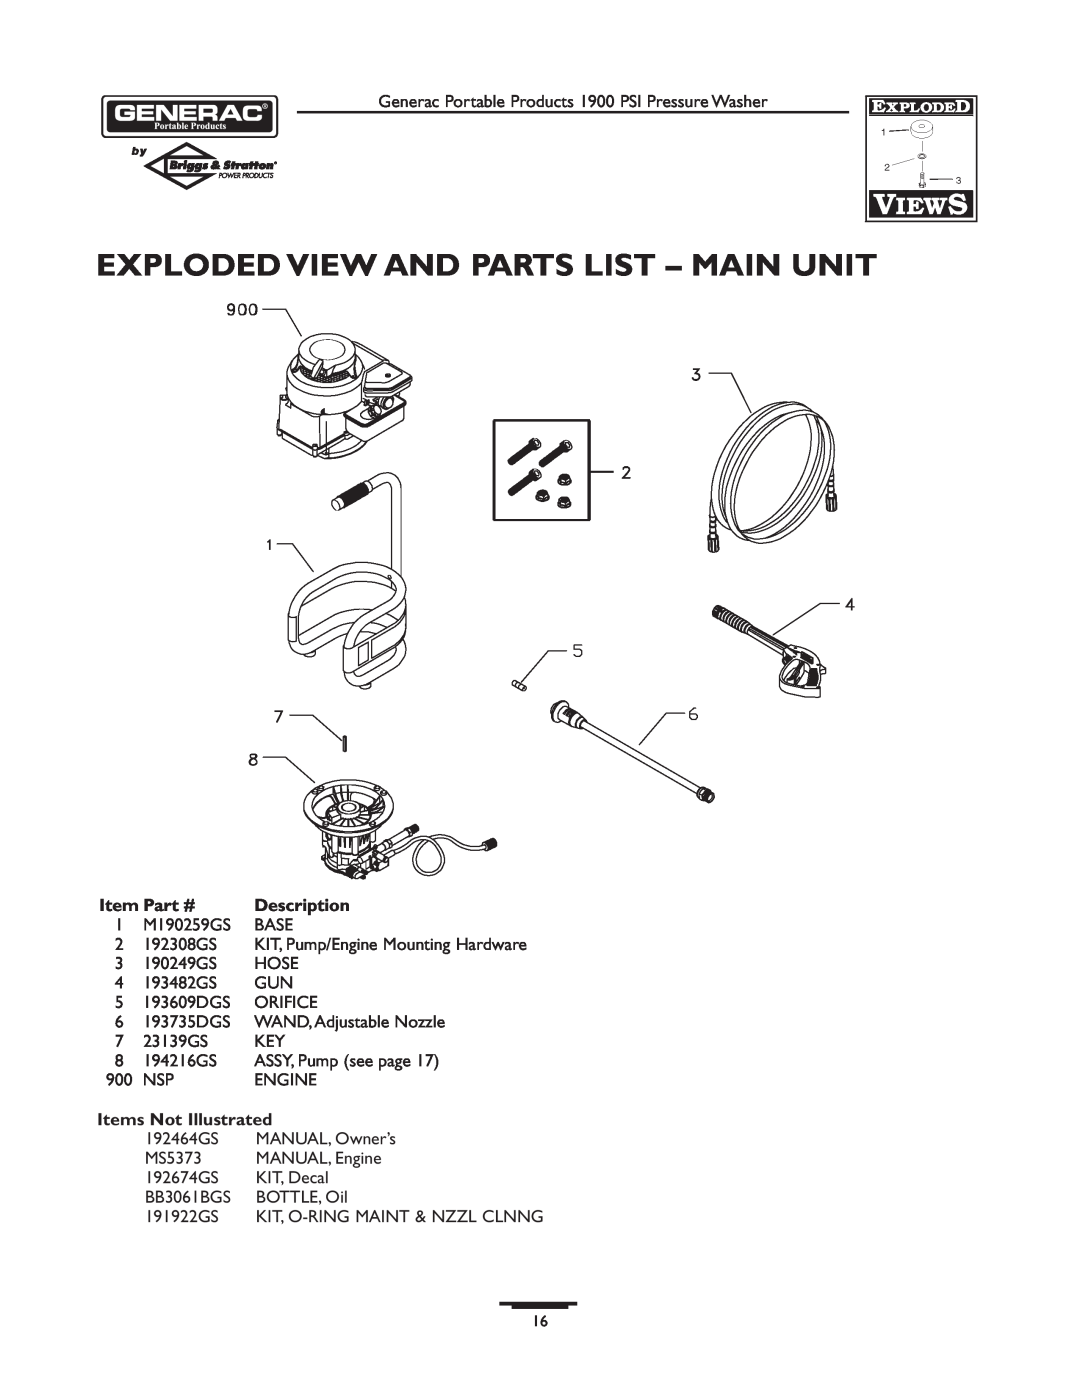 Briggs & Stratton 1900PSI owner manual Exploded View And Parts List - Main Unit, Description, Items Not Illustrated 